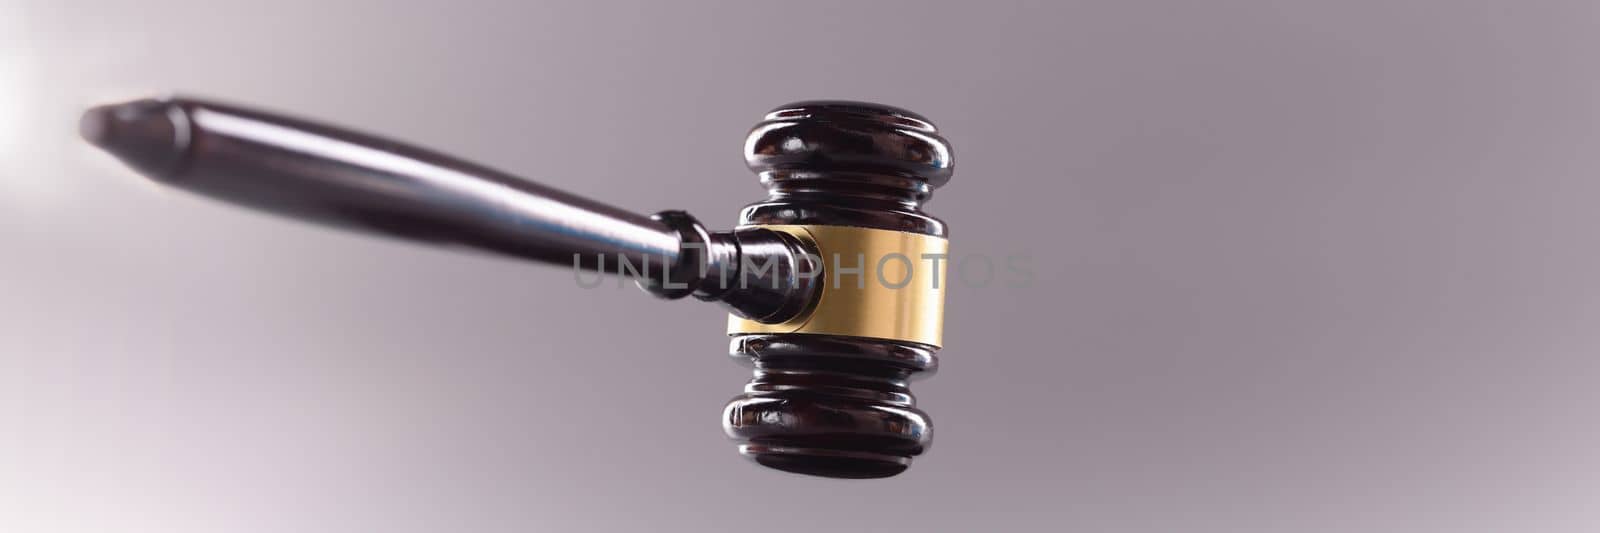 Wooden gavel for court or auction on gray background by kuprevich